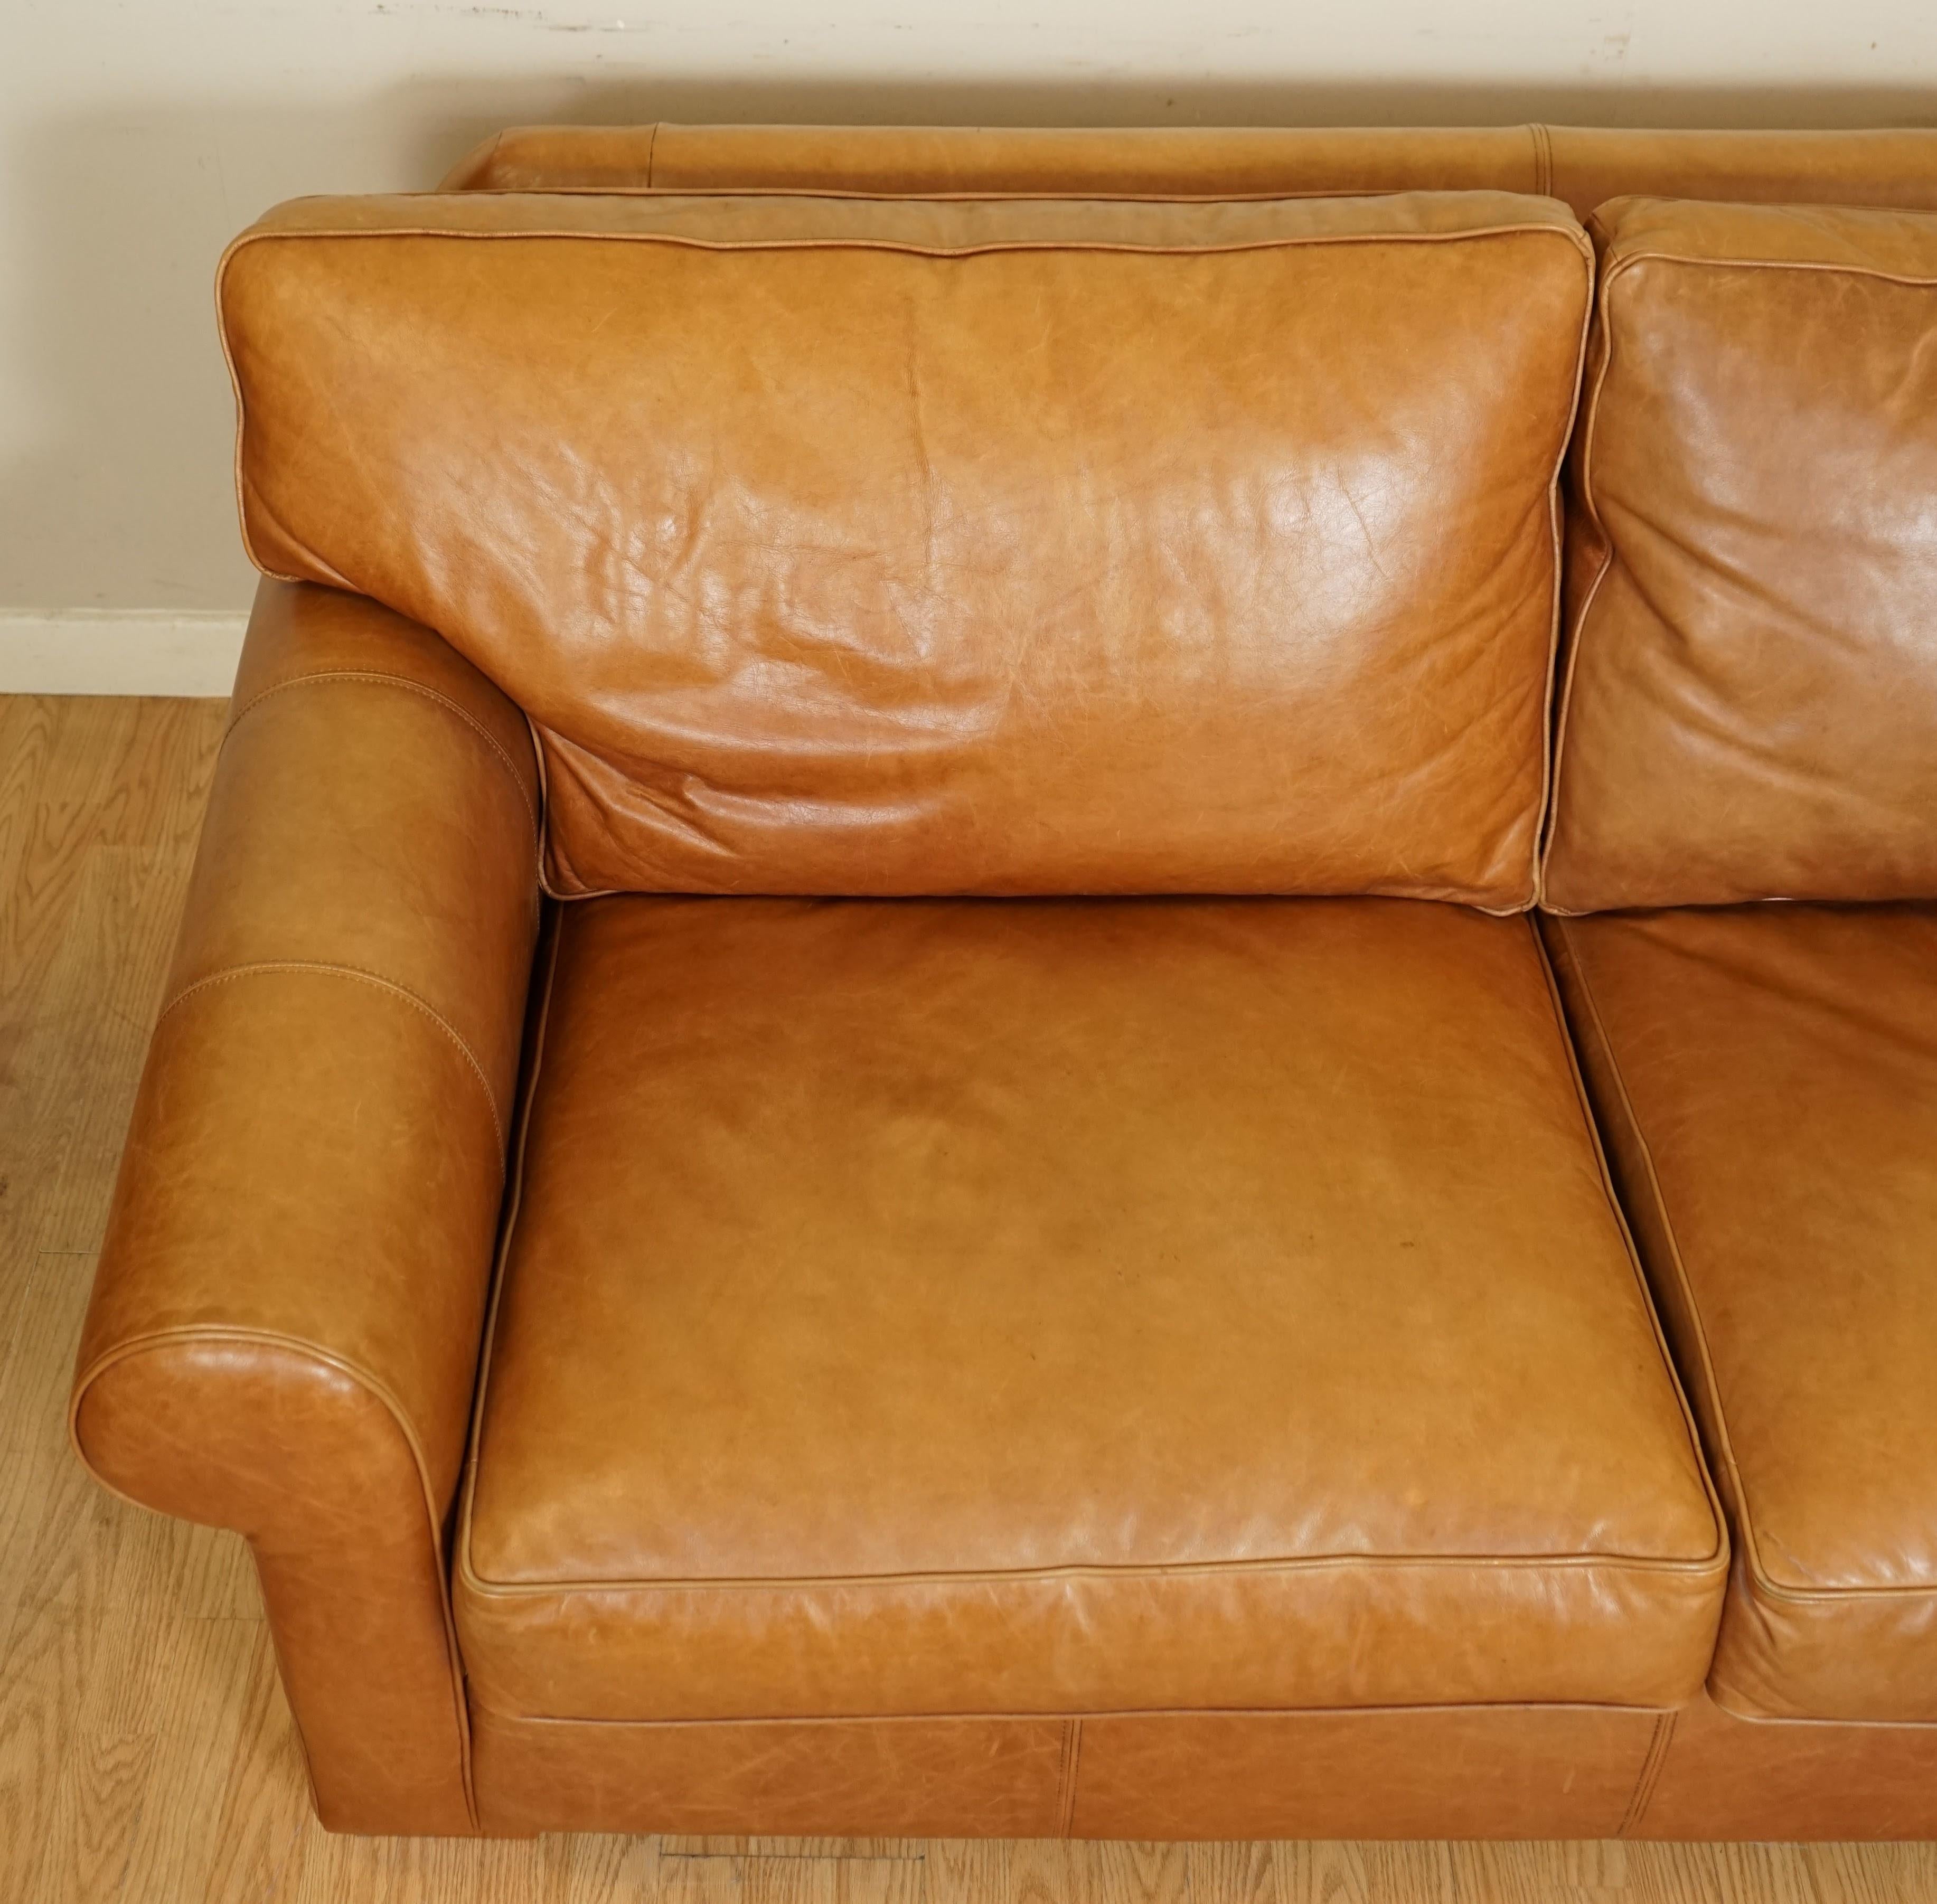 20th Century Sumptuous Multiyork Buttery Soft Tan Leather Two Three Seater Sofa